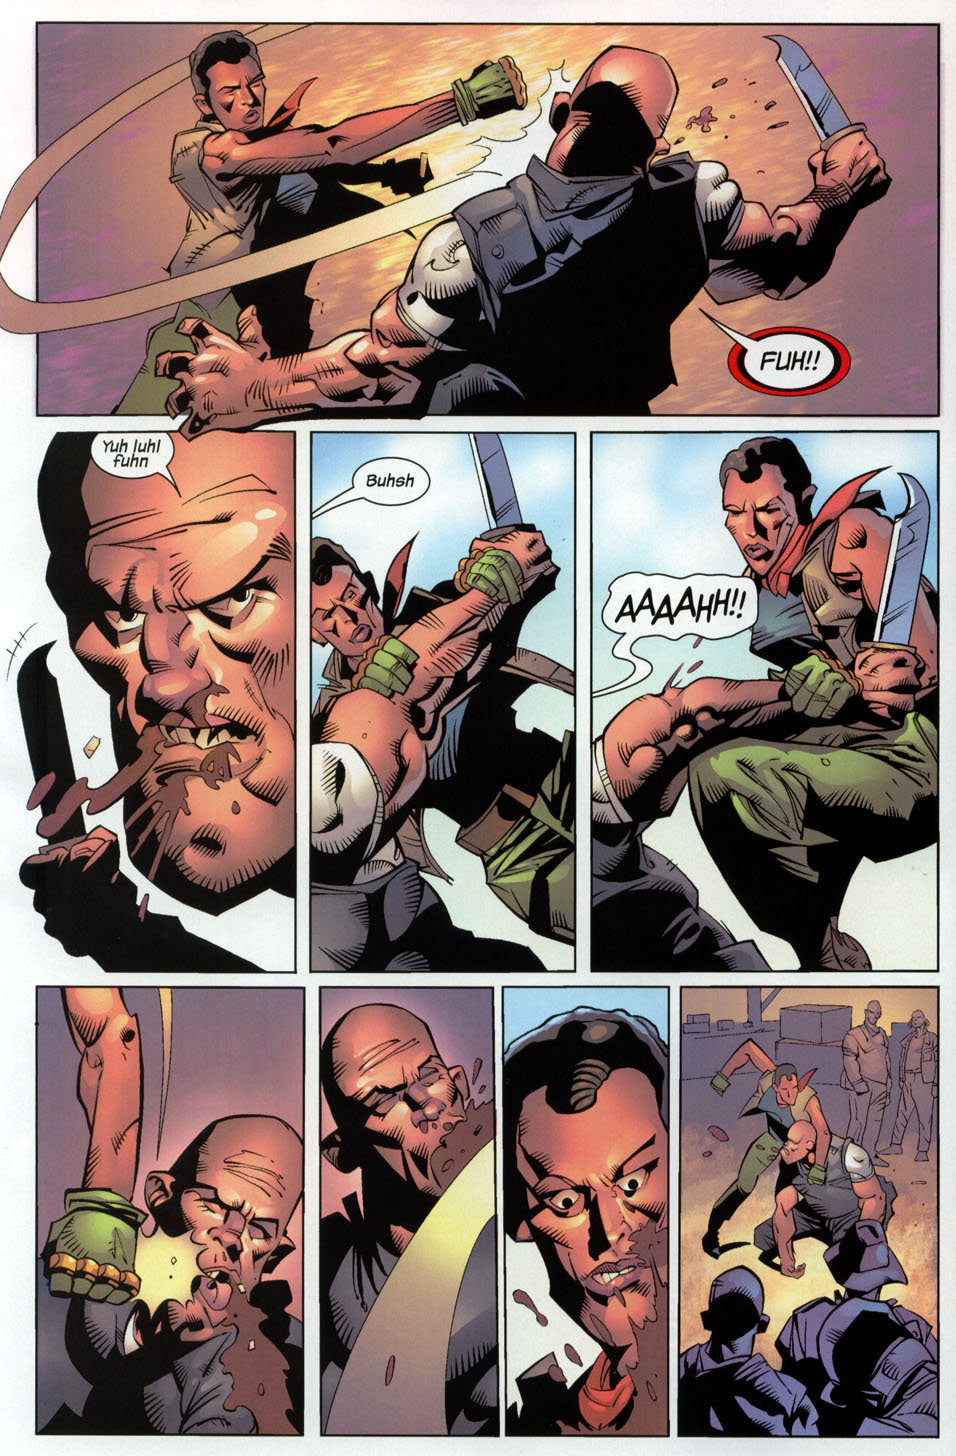 The Punisher (2001) issue 29 - Streets of Laredo #02 - Page 8